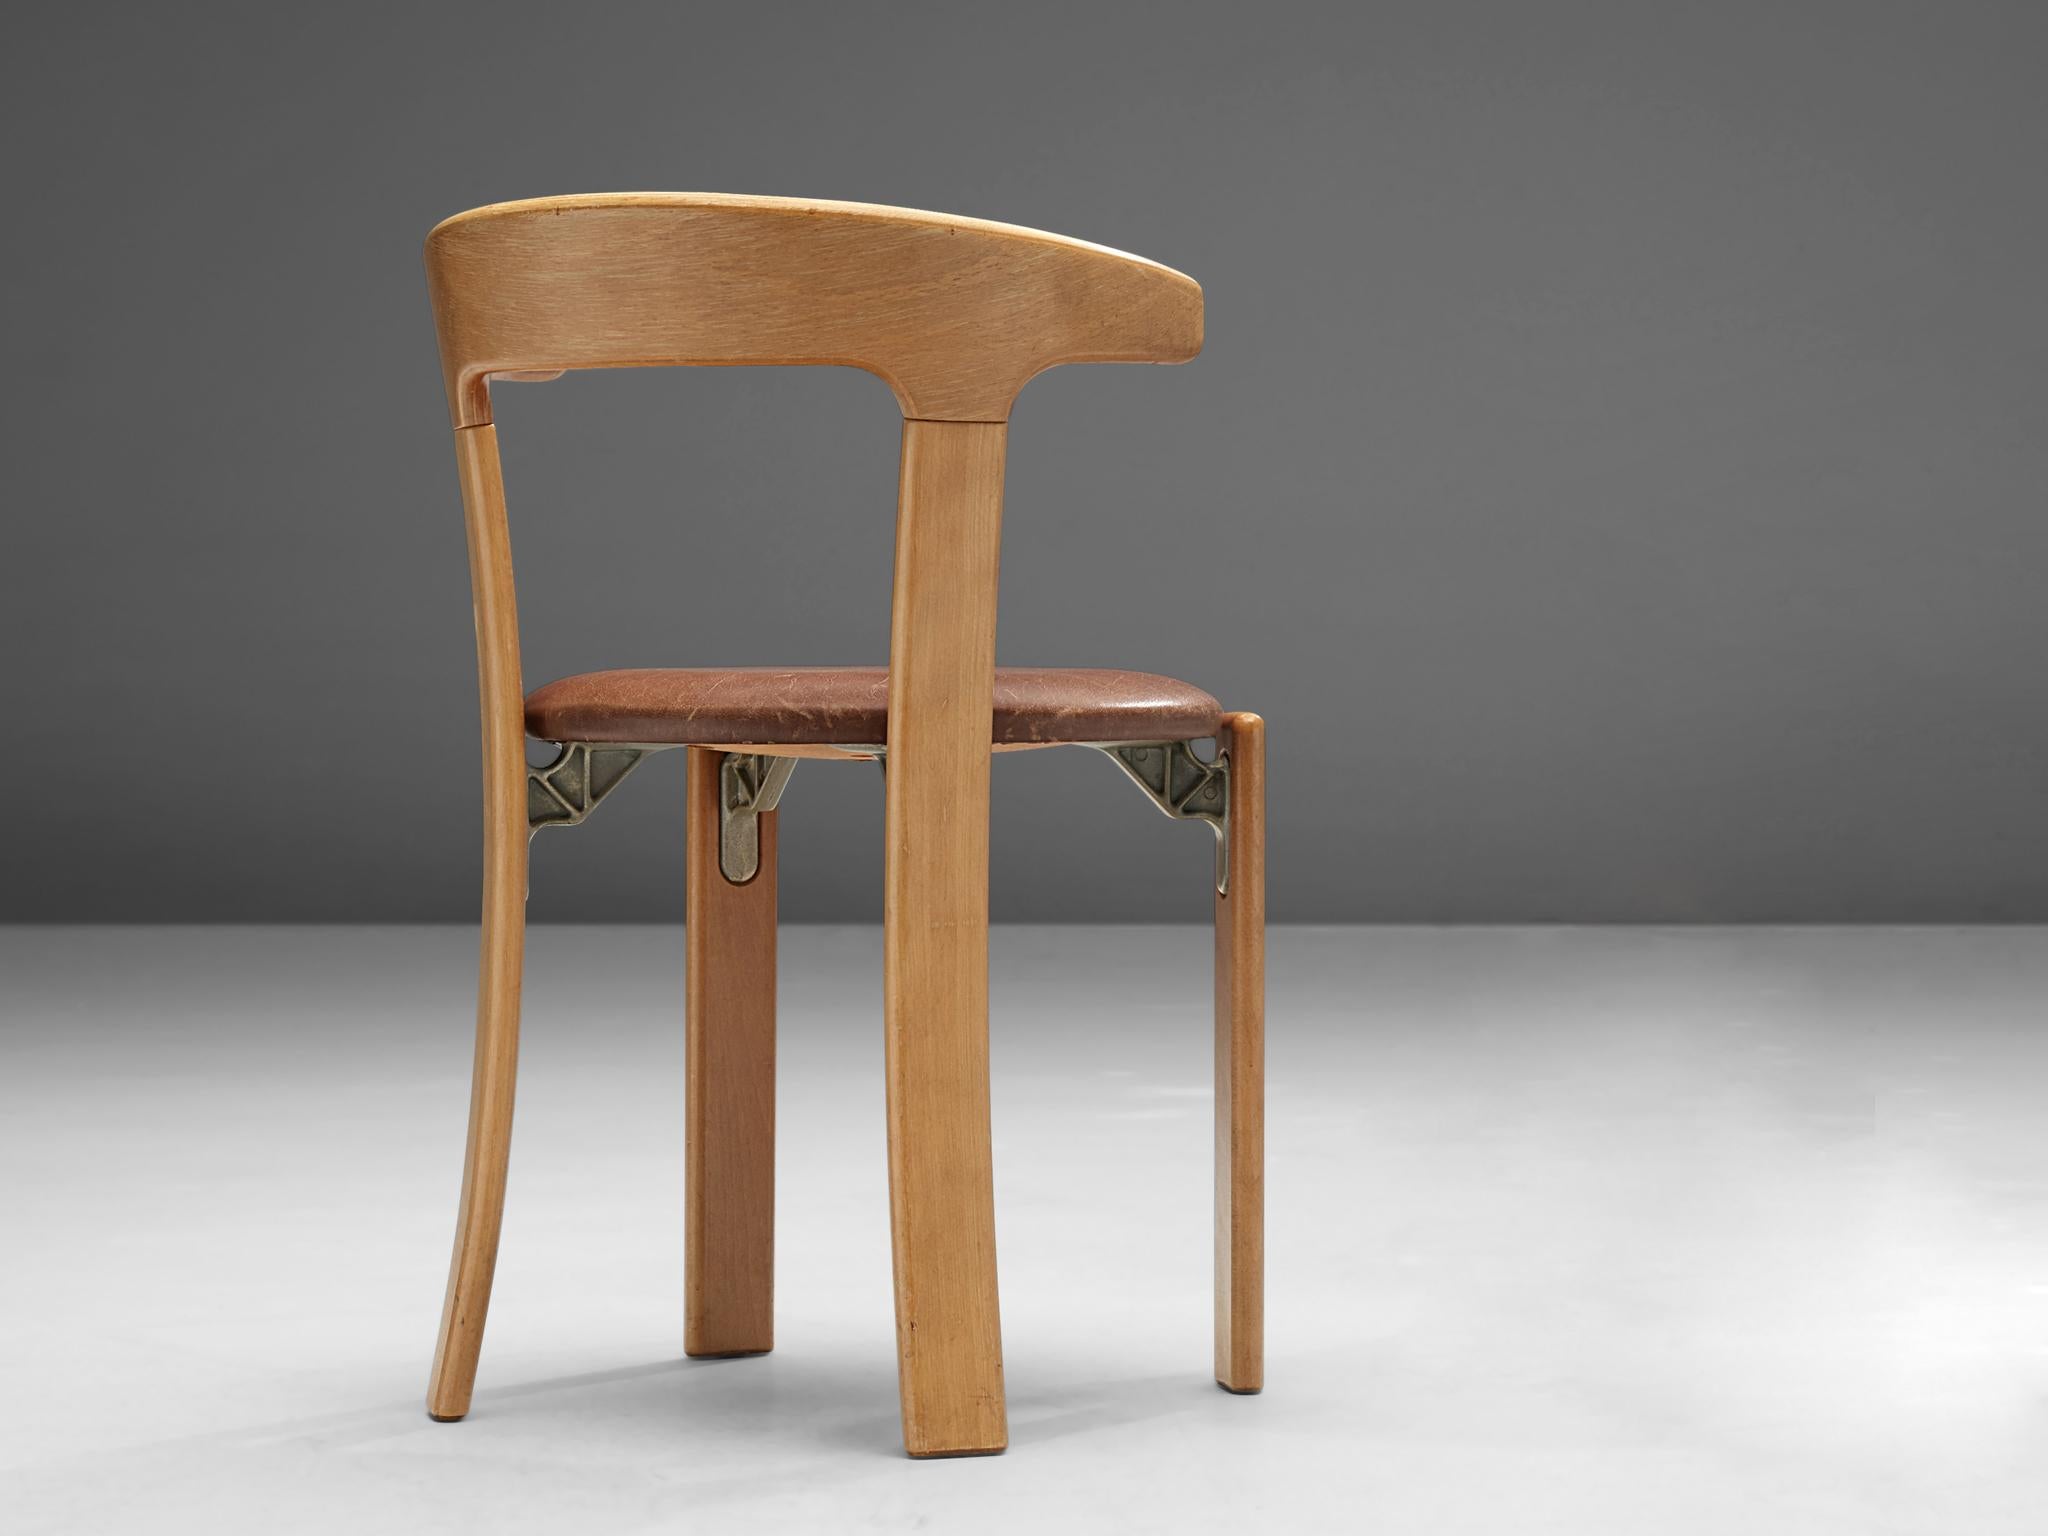 Bruno Rey for Kush & Co, chair, leather and beech, Switzerland, 1971.

This chair is designed by Bruno Rey in Switzerland in 1971 and is very comfortable. The beech backrest and legs have rounded edges. Besides, the backrest has a sculptural